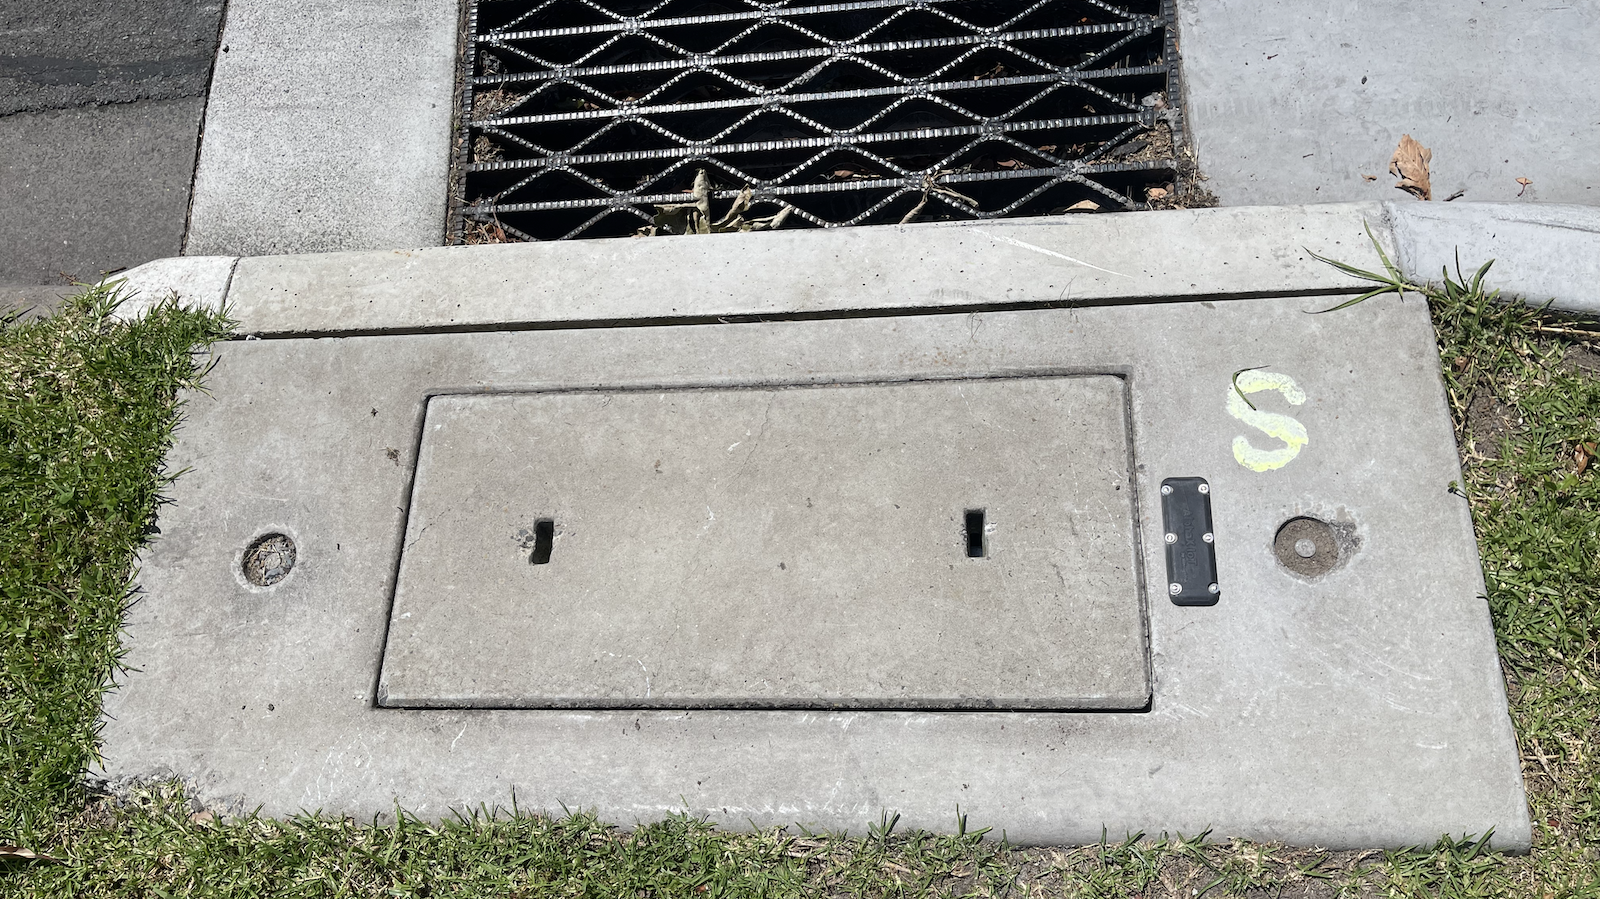 stormwater pit monitoring system